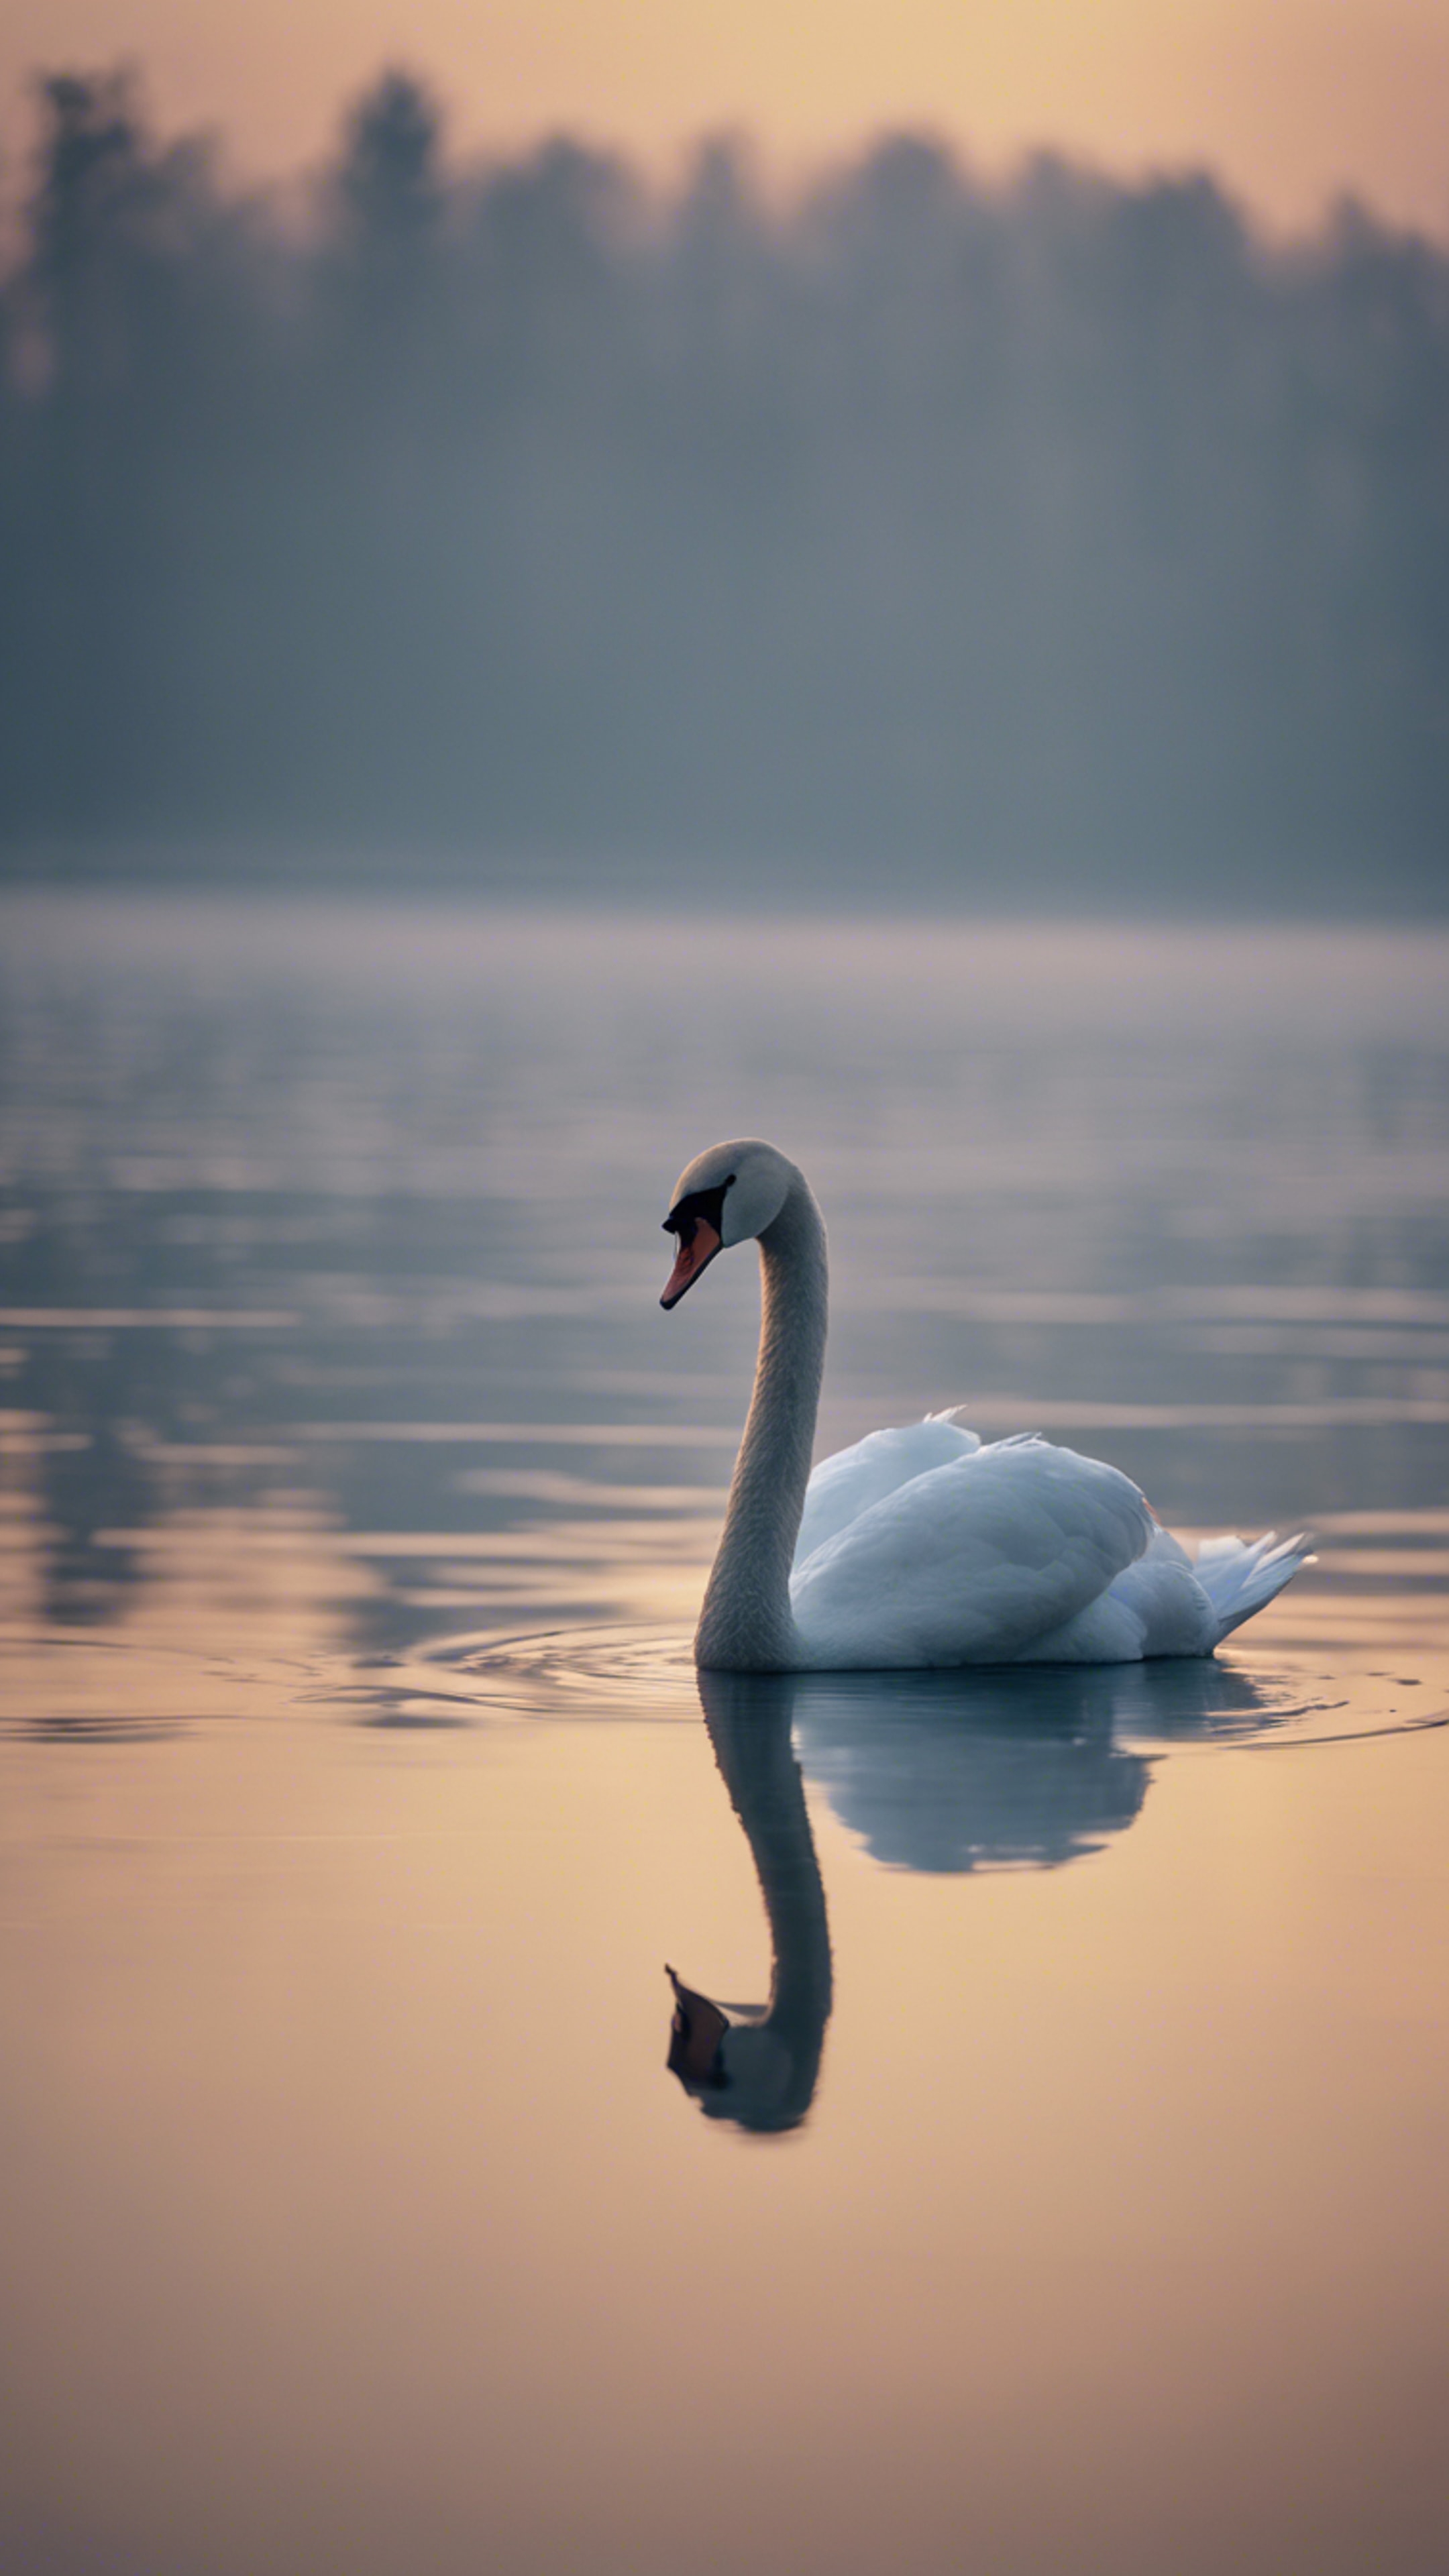 A single love-struck swan swimming alone in a desolate lake under the pallid glow of a gloomy moon. Papel de parede[674930fc7c9f467a8426]